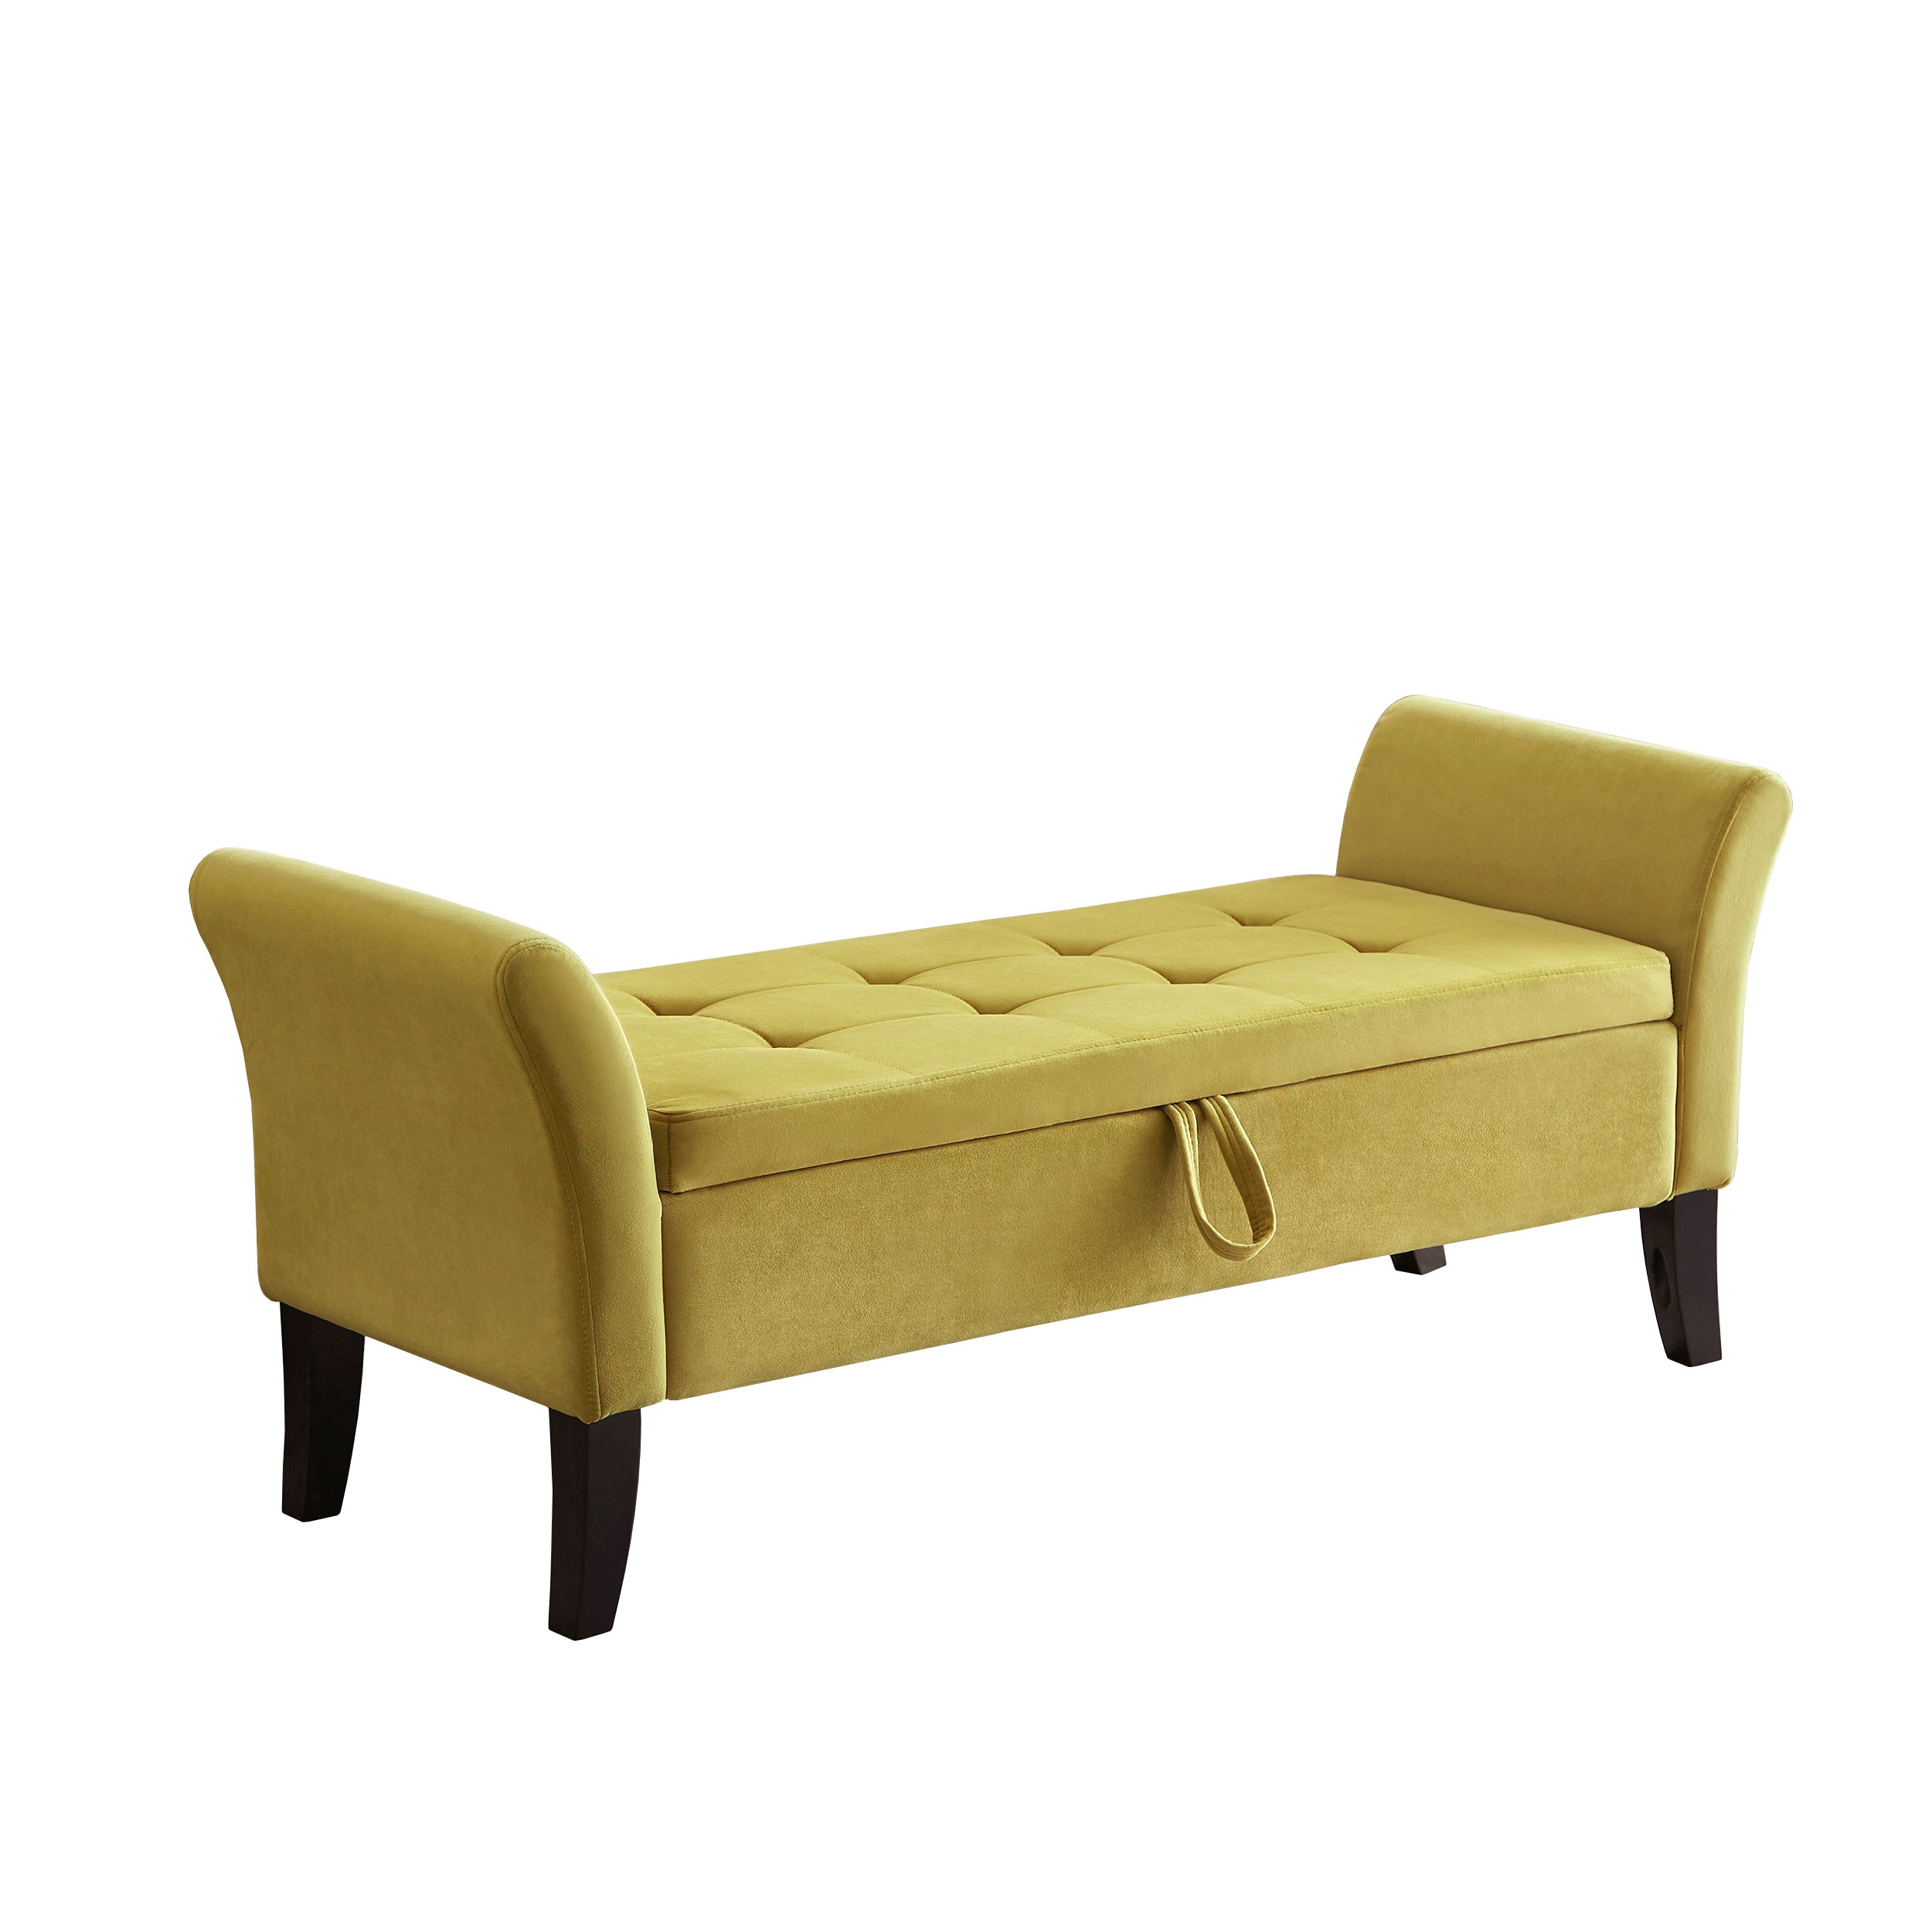 ZNTS 51.5" Bed Bench with Storage Green Velvet W1097104008